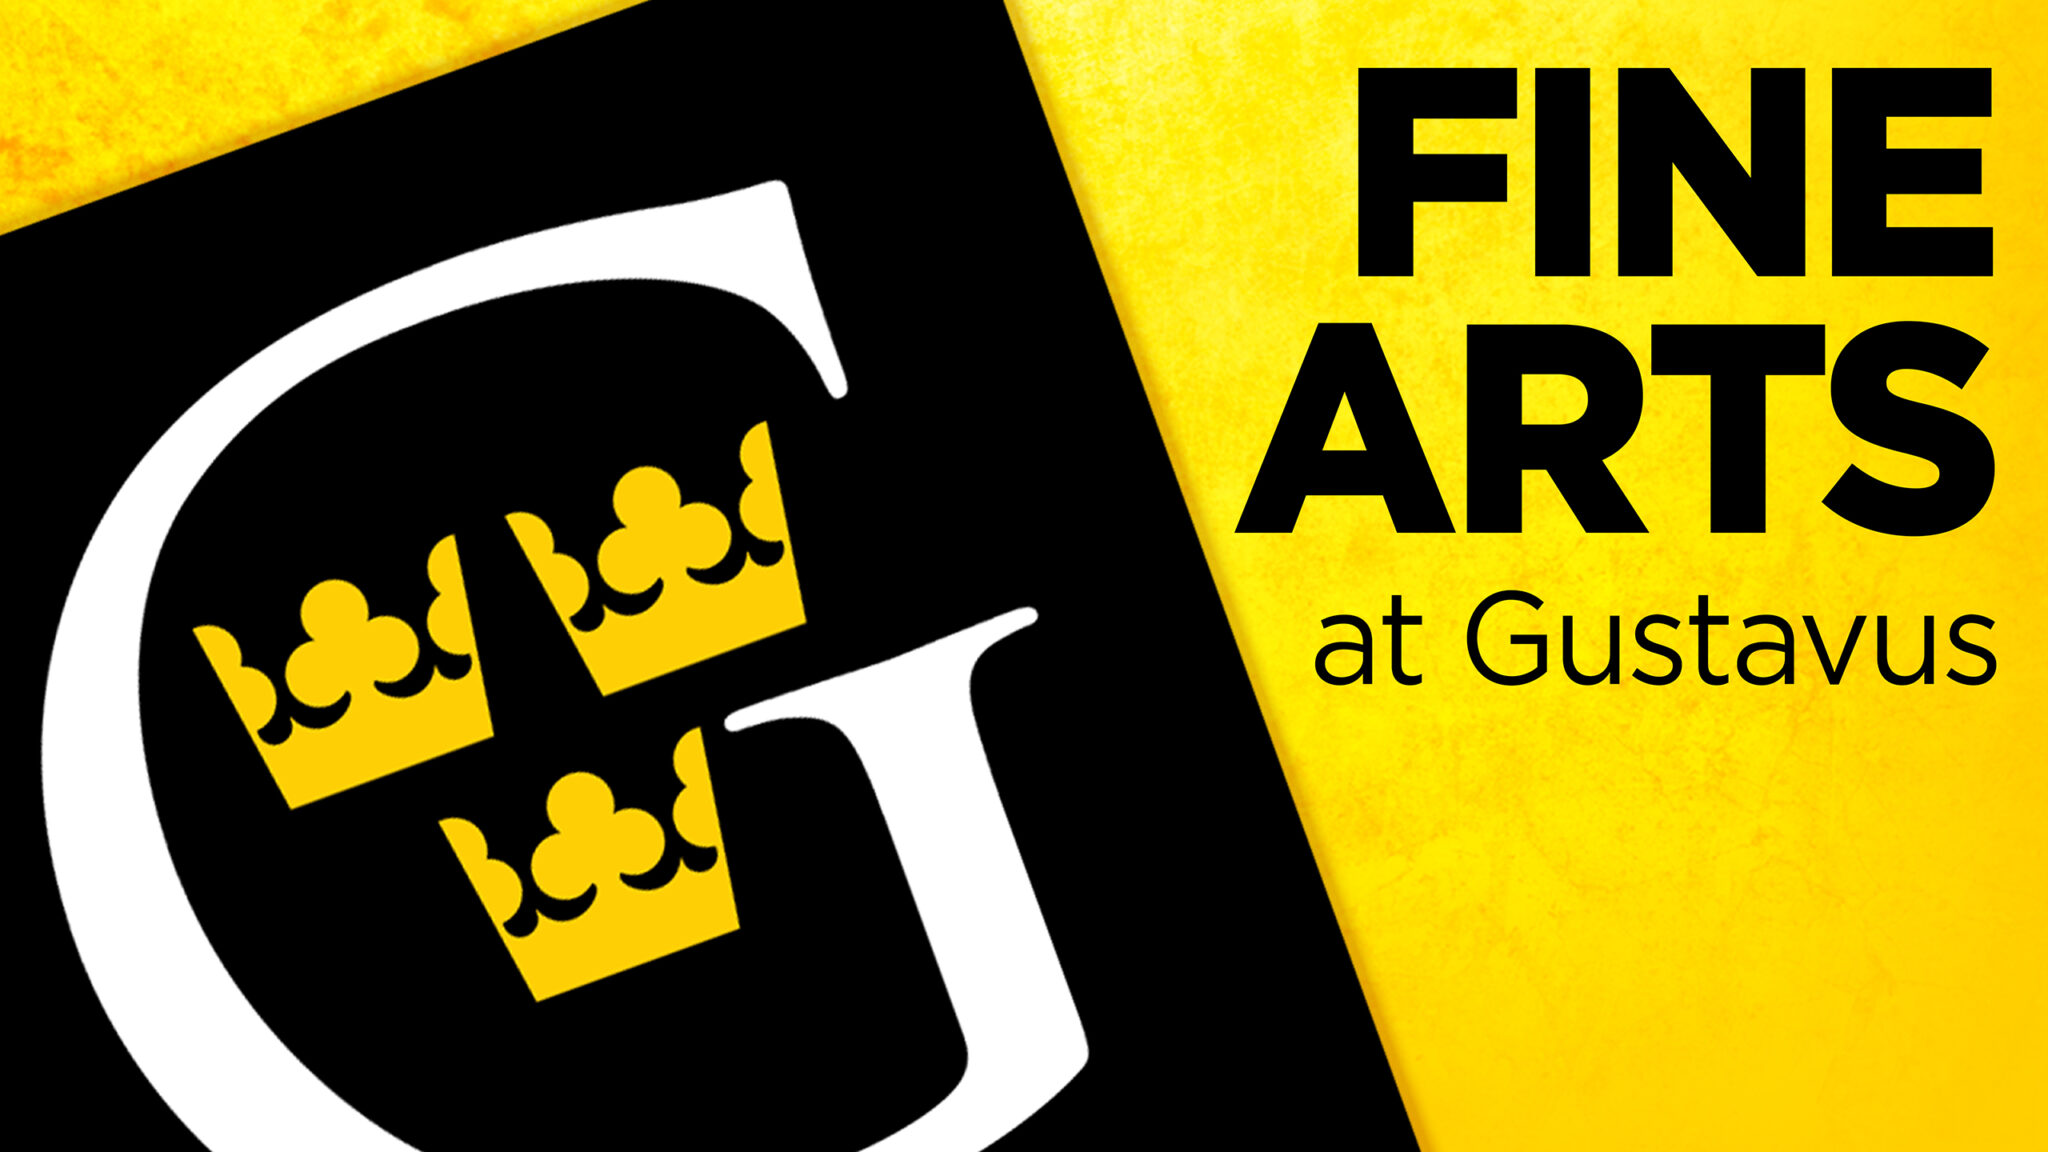 Gustavus Fine Arts Reflections on 2019 Posted on December 20th, 2019